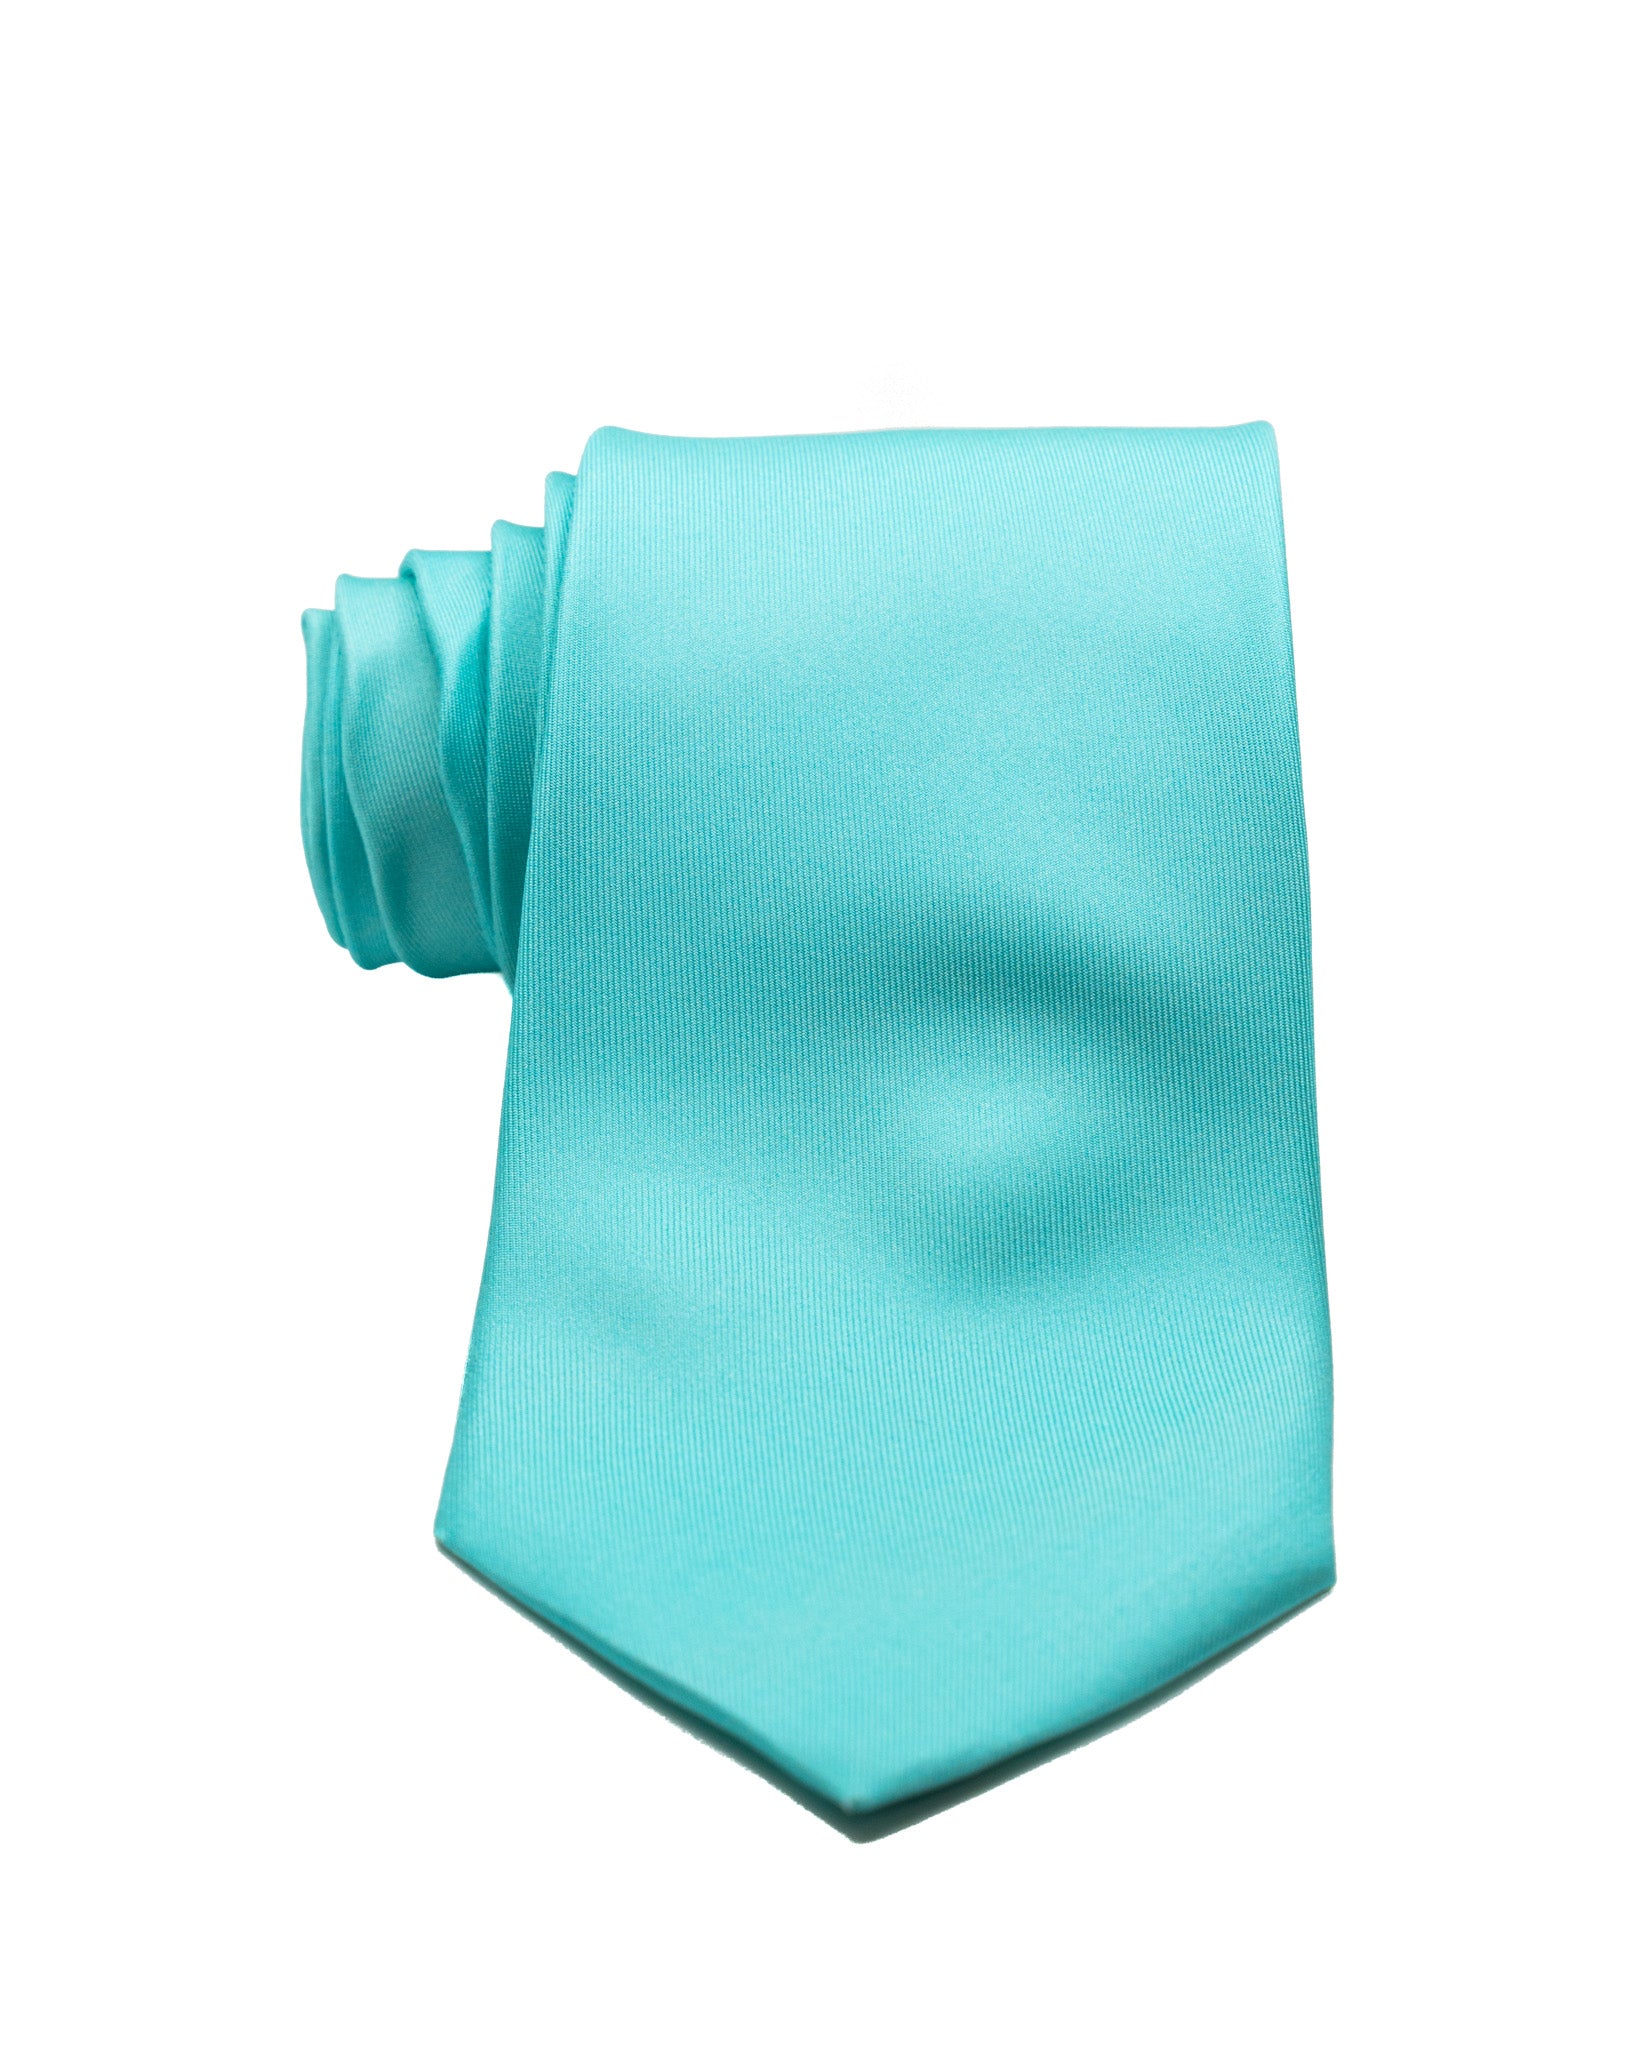 Tie - in turquoise woven silk